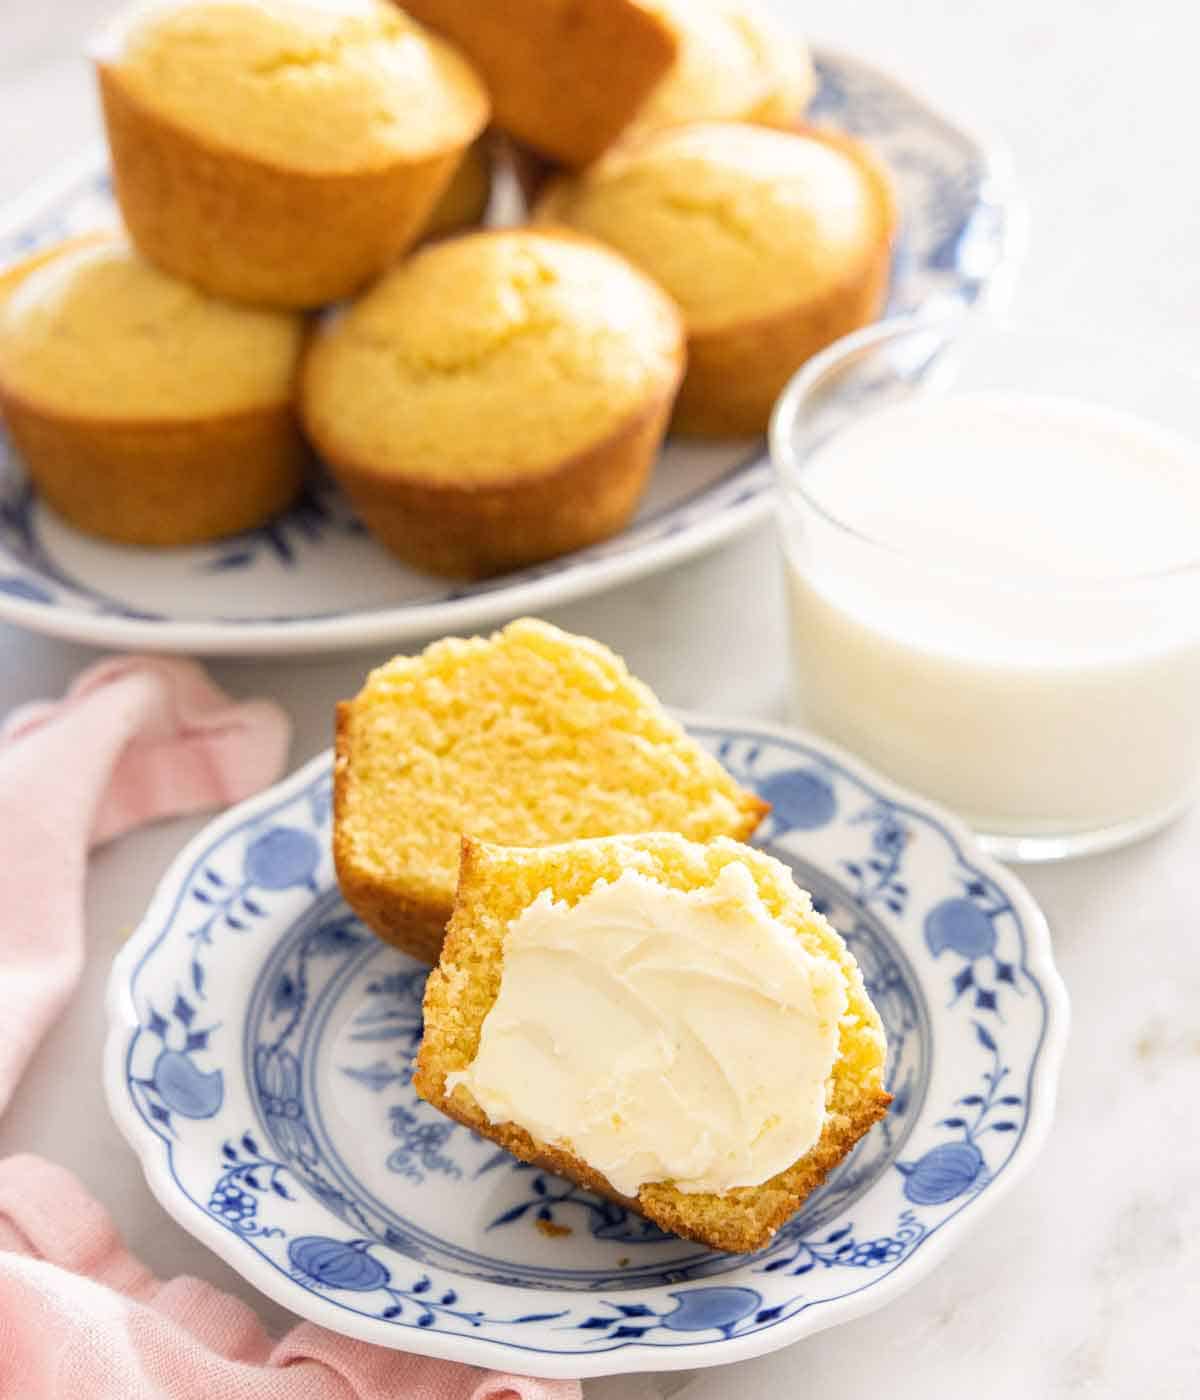 A plate with a cornbread muffin cut in half with butter spread on it.